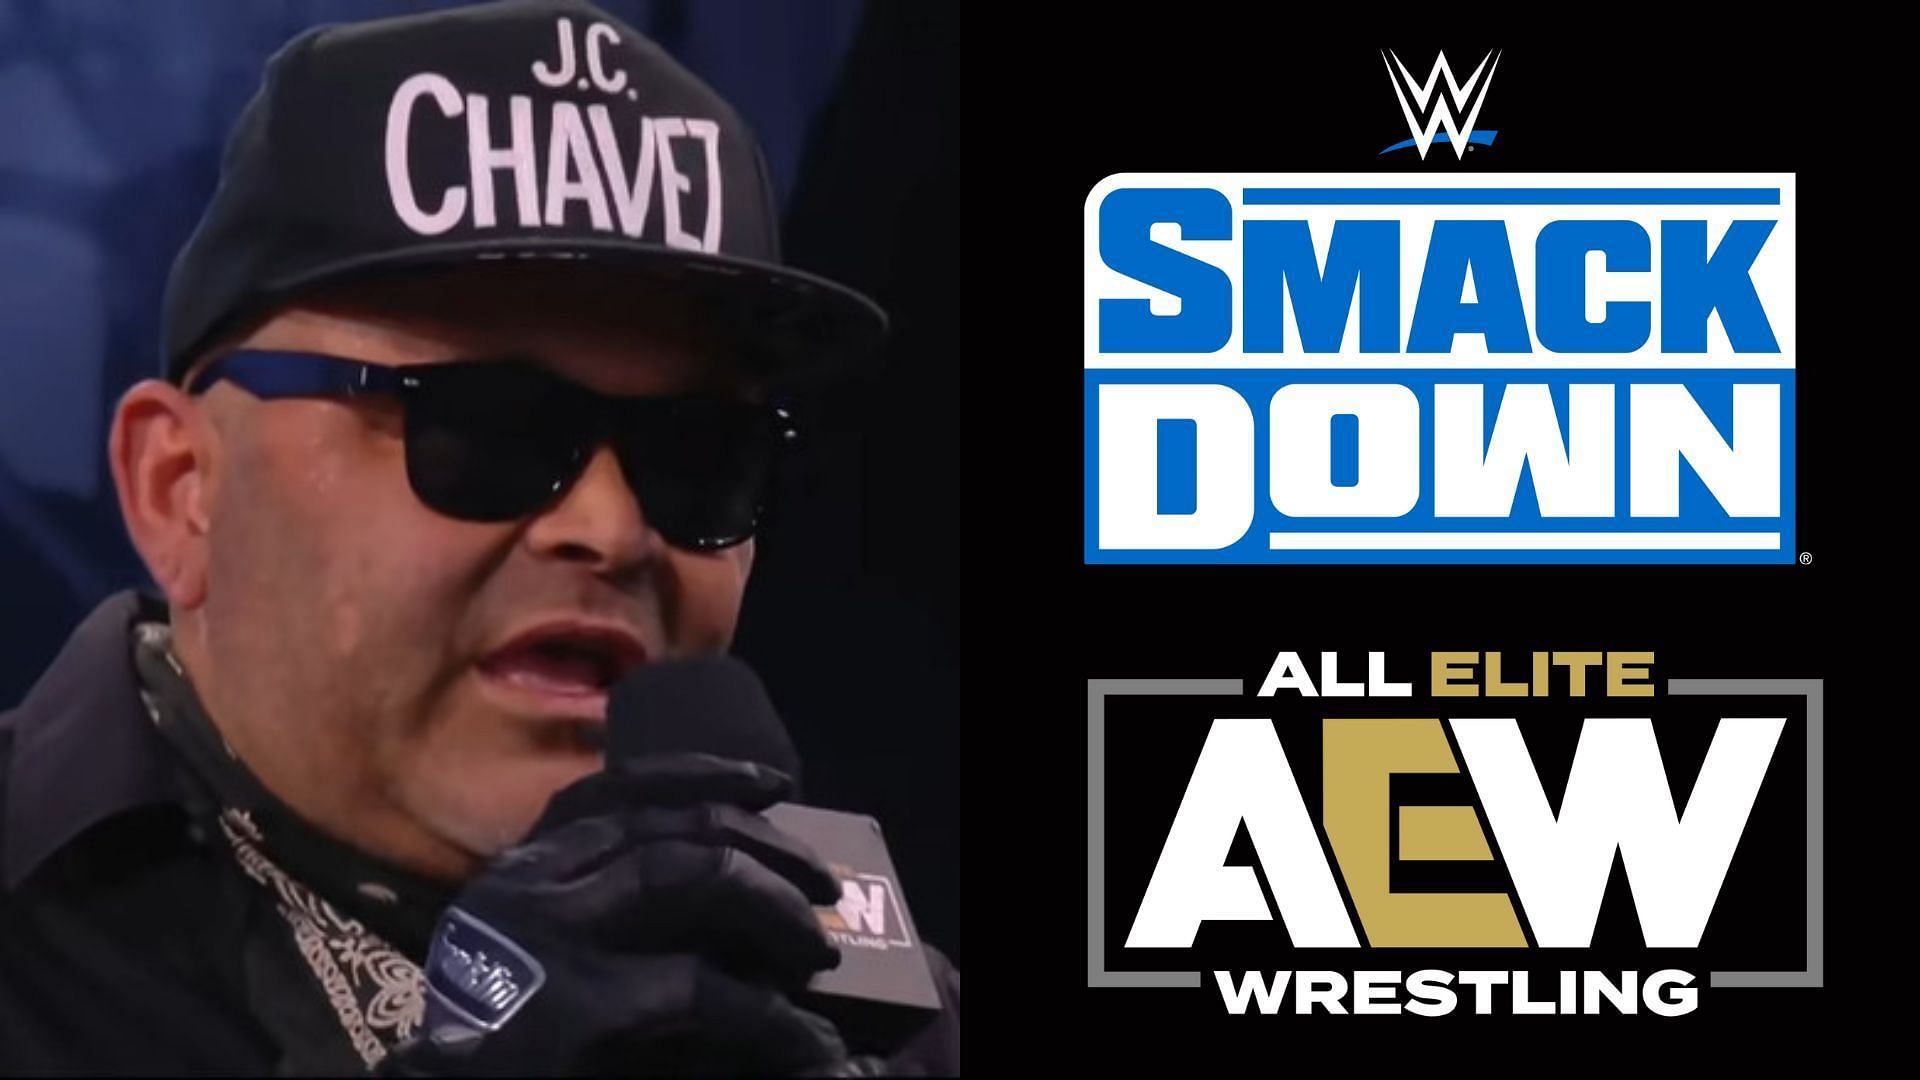 Konnan says that this WWE Superstar will not join AEW.